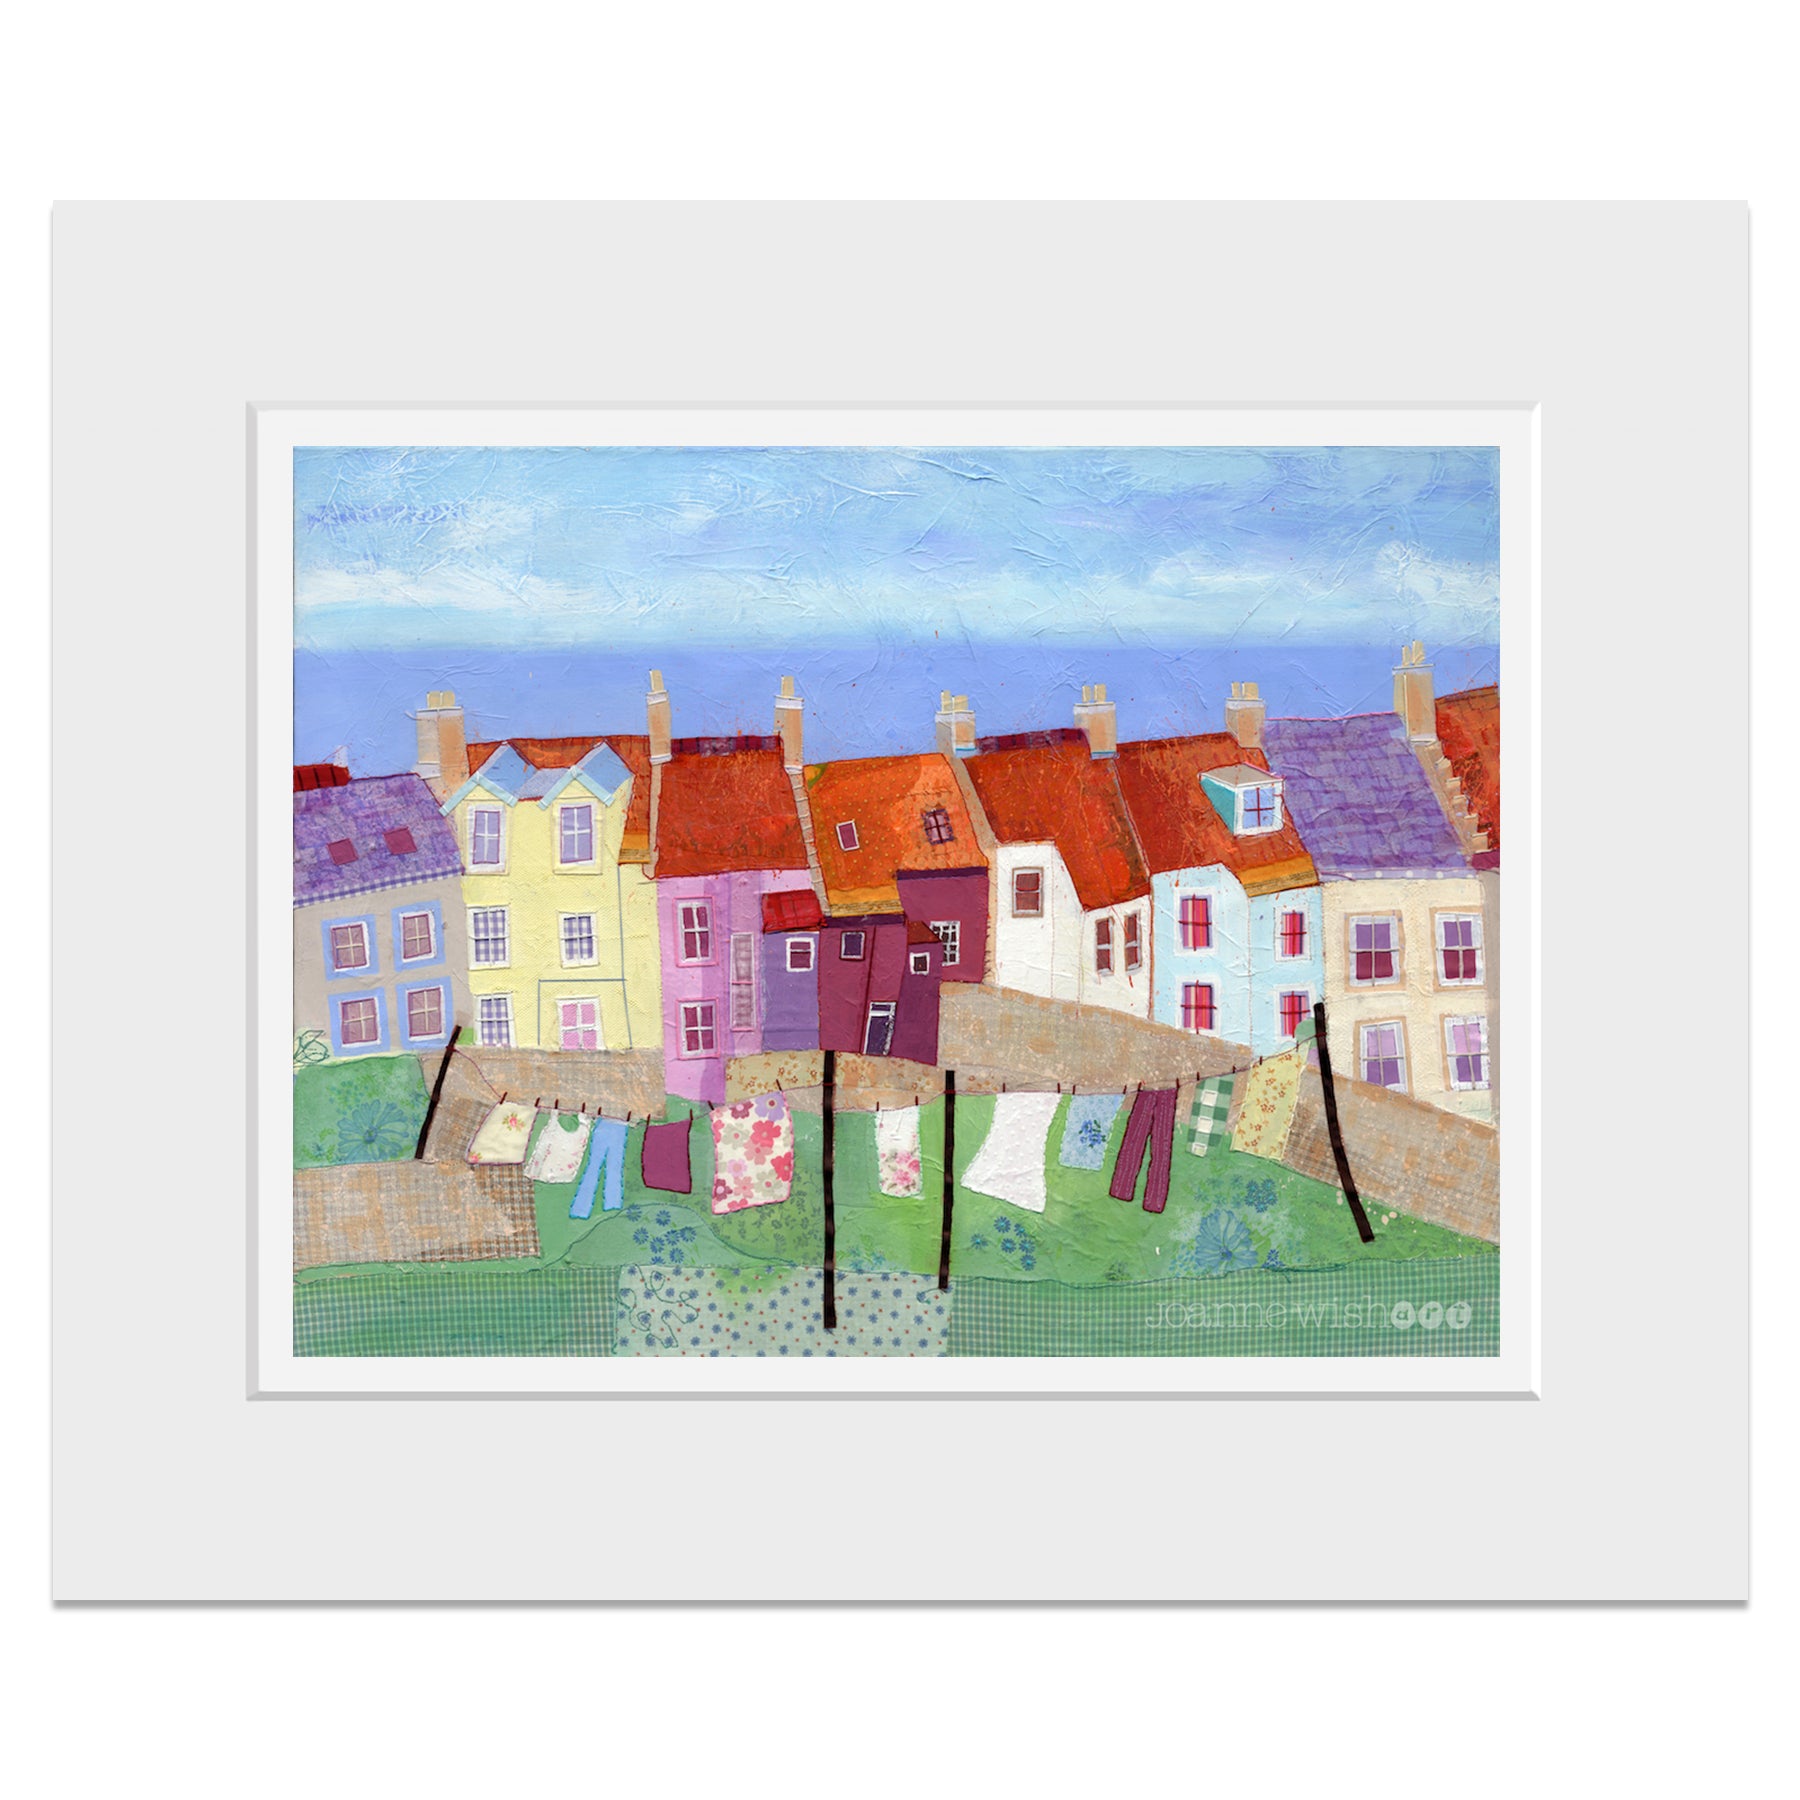 A mounted print of Pittenweem in Fife, with orange rooftops and waving on the line.